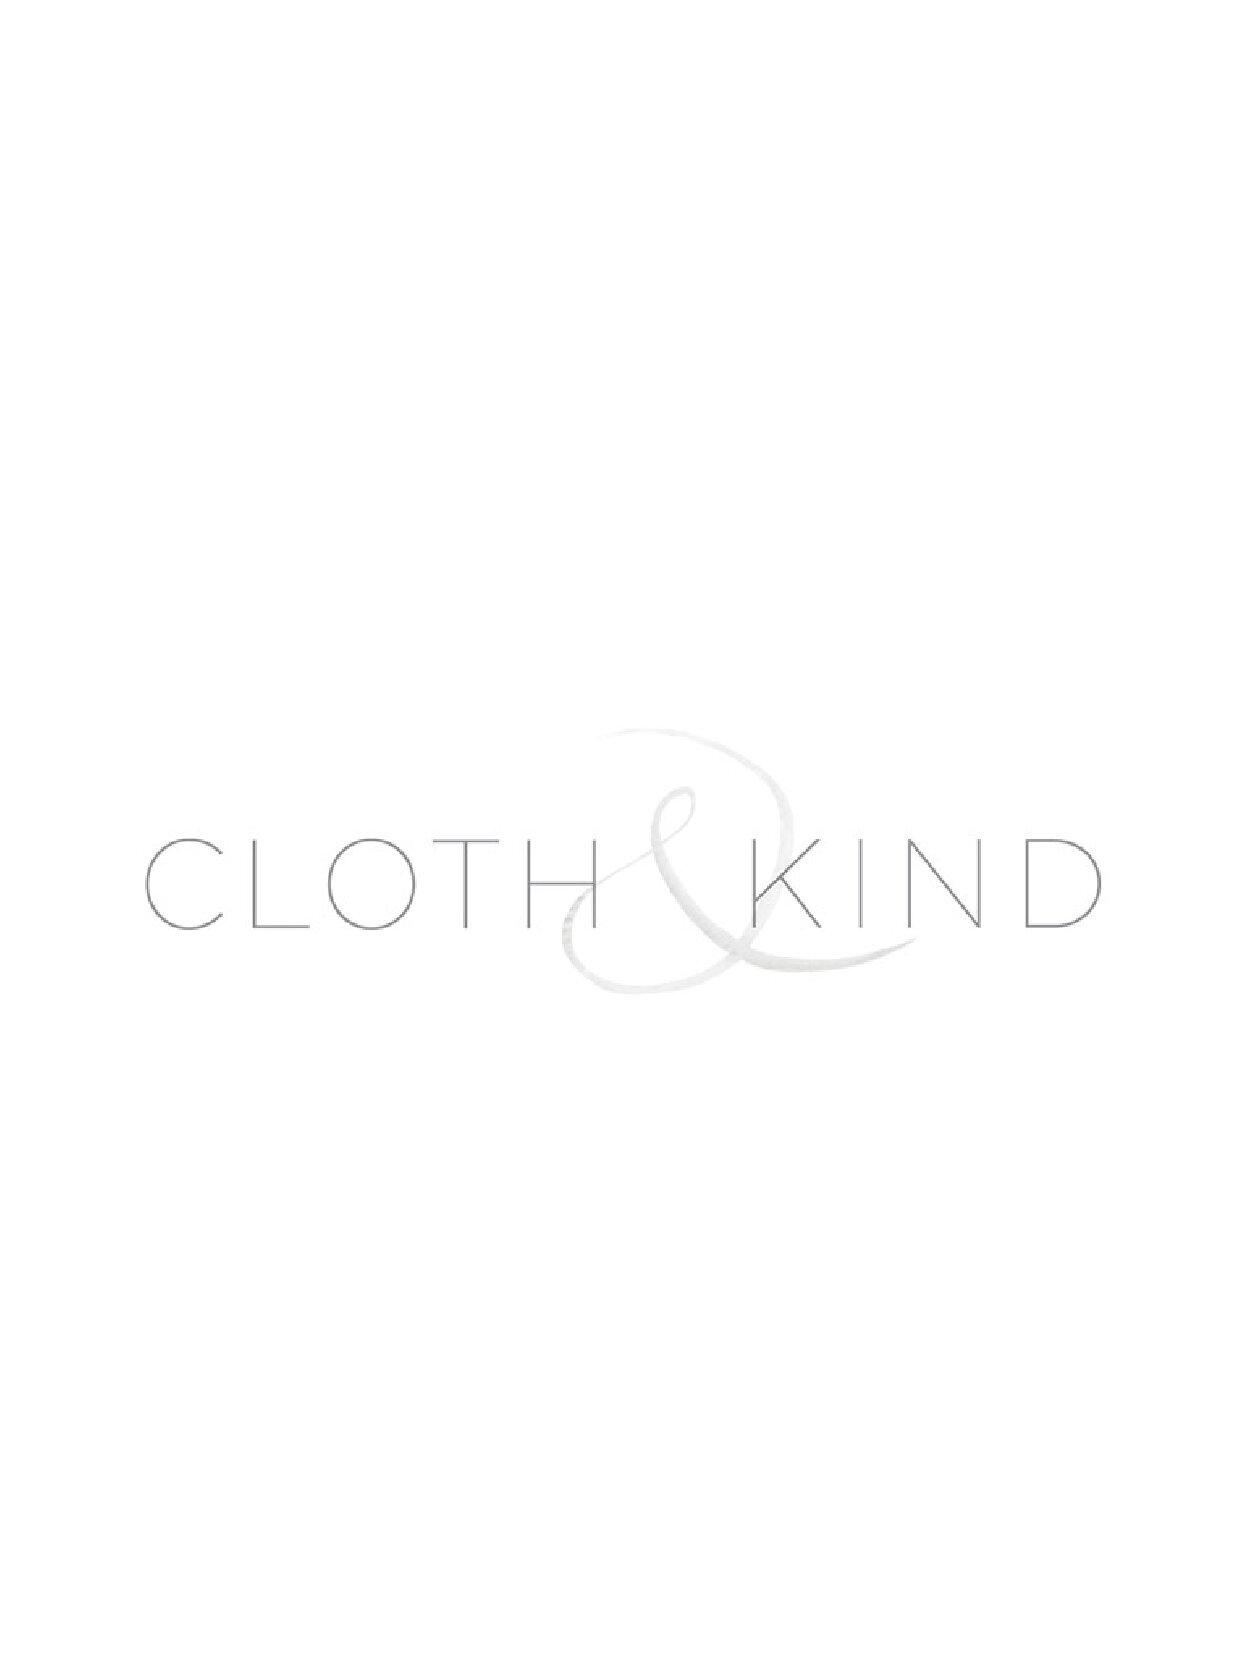 Cloth and Kind Feature